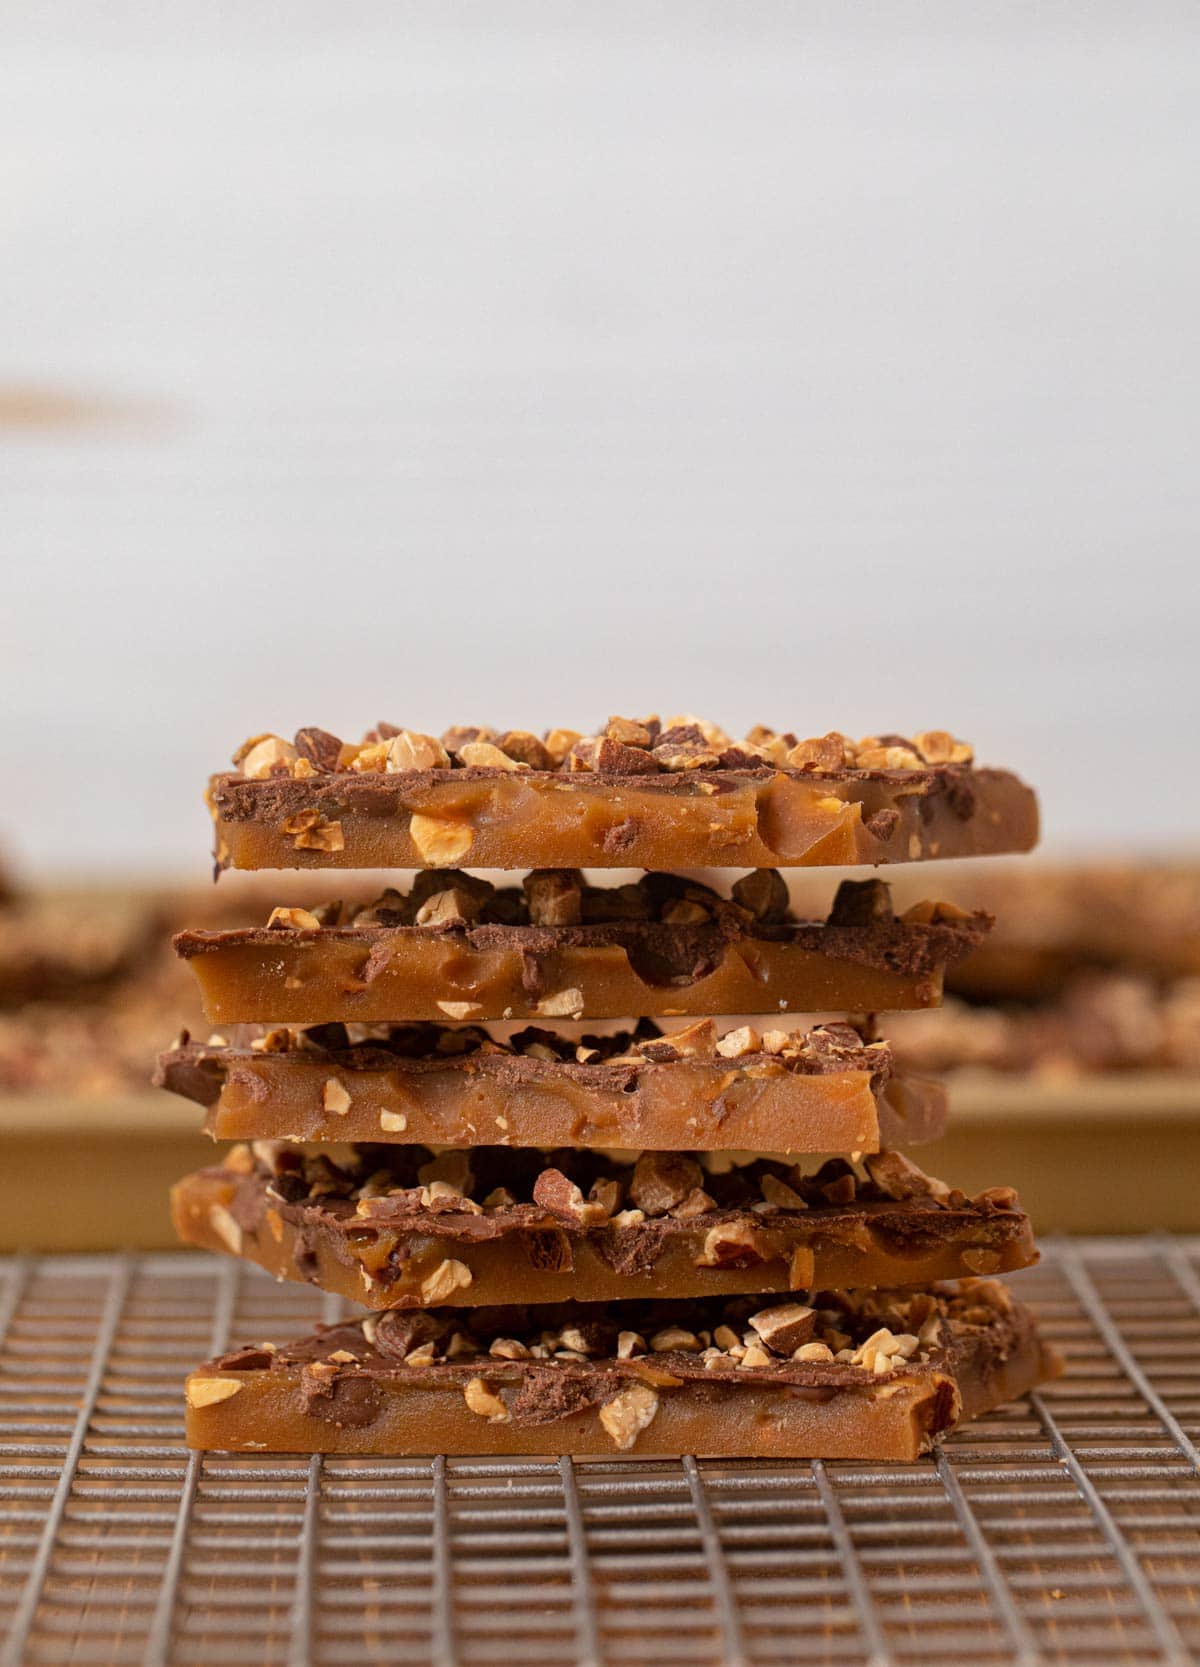 Butter Toffee pieces in stack